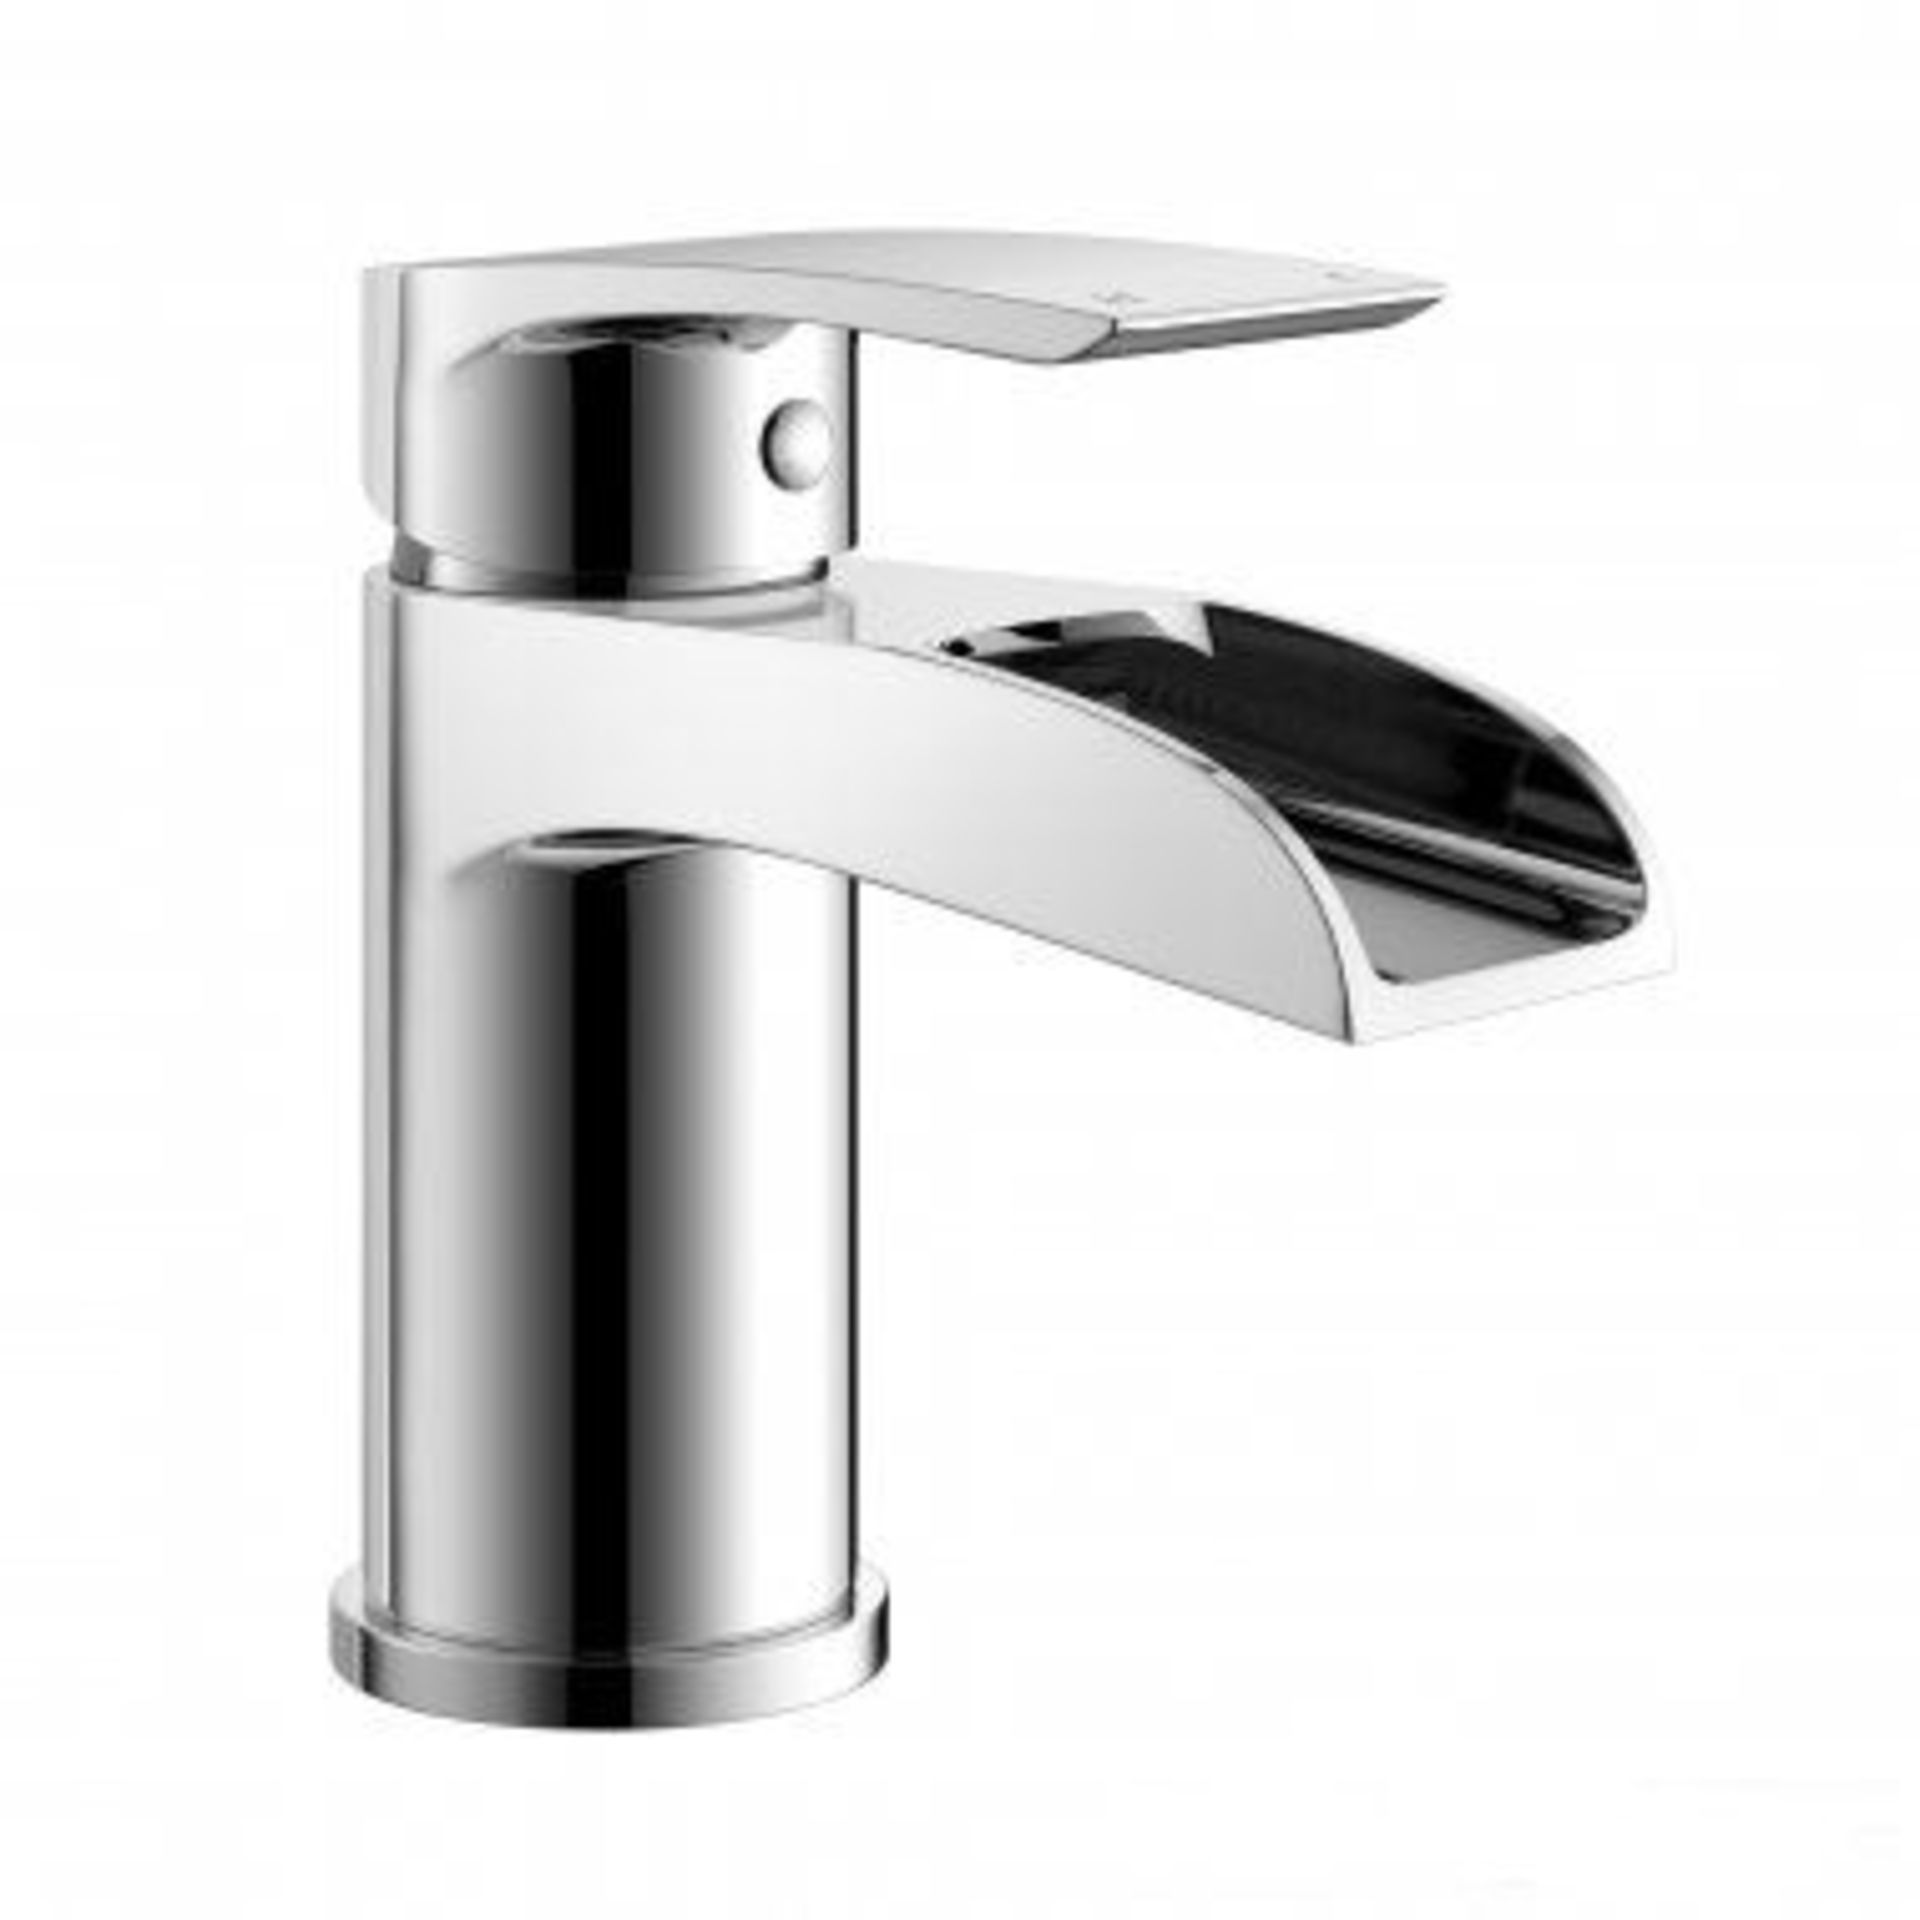 New & Boxed Avis Waterfall Basin Mixer Tap. Tb151.Chrome Plated Solid Brass Mirror Finish. Lat... - Image 2 of 2